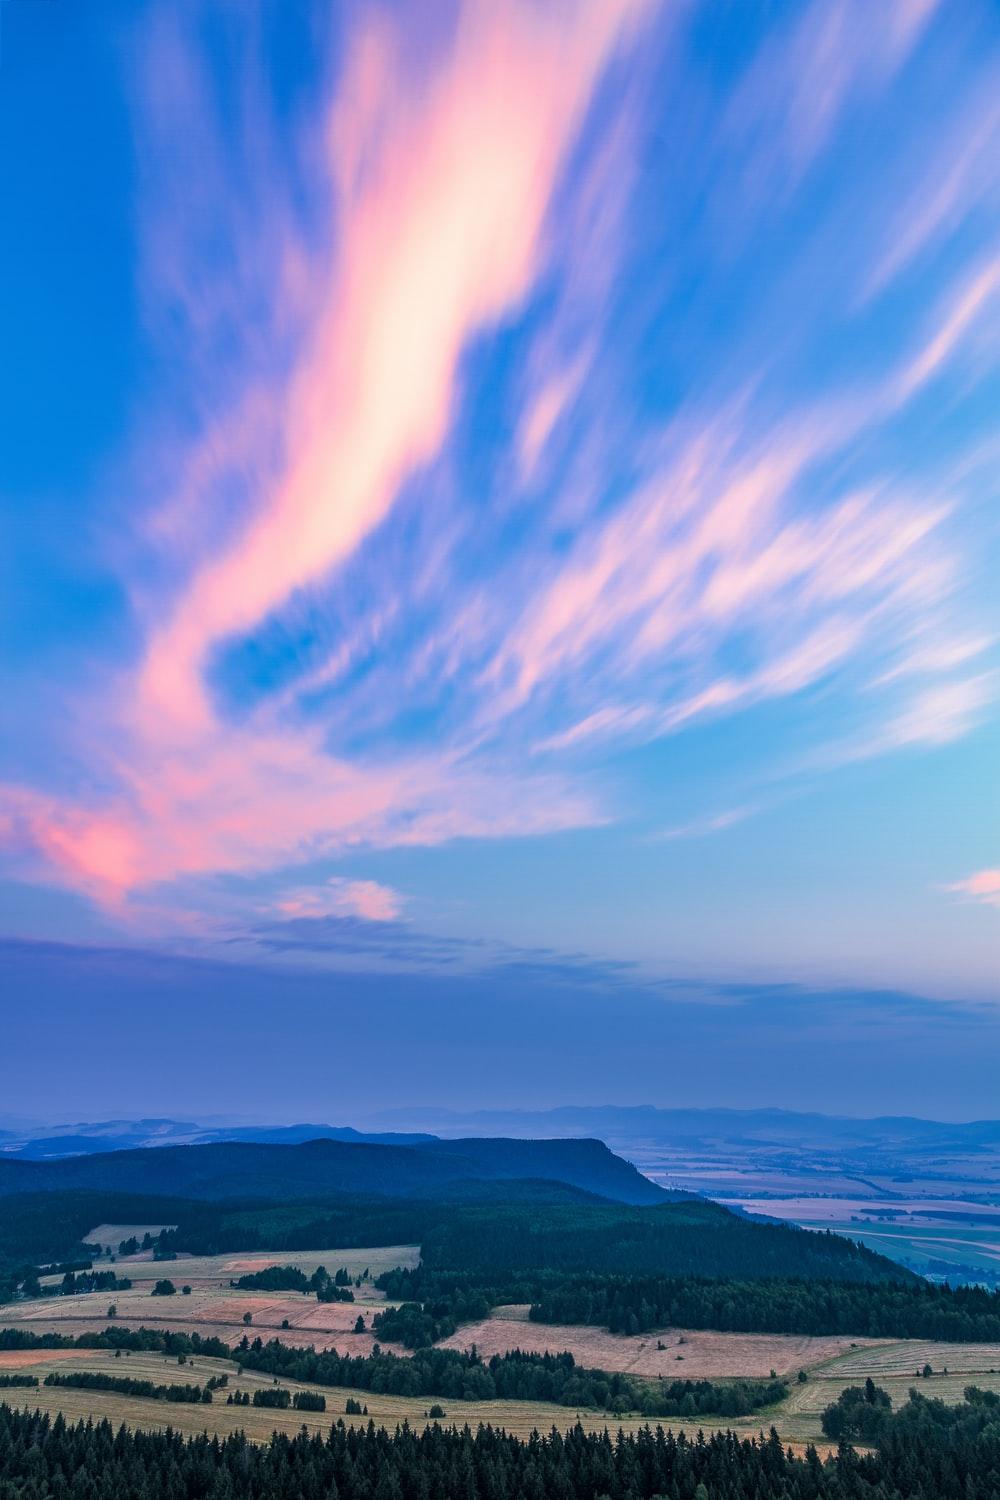 Pink And Blue Sky Picture. Download Free Image